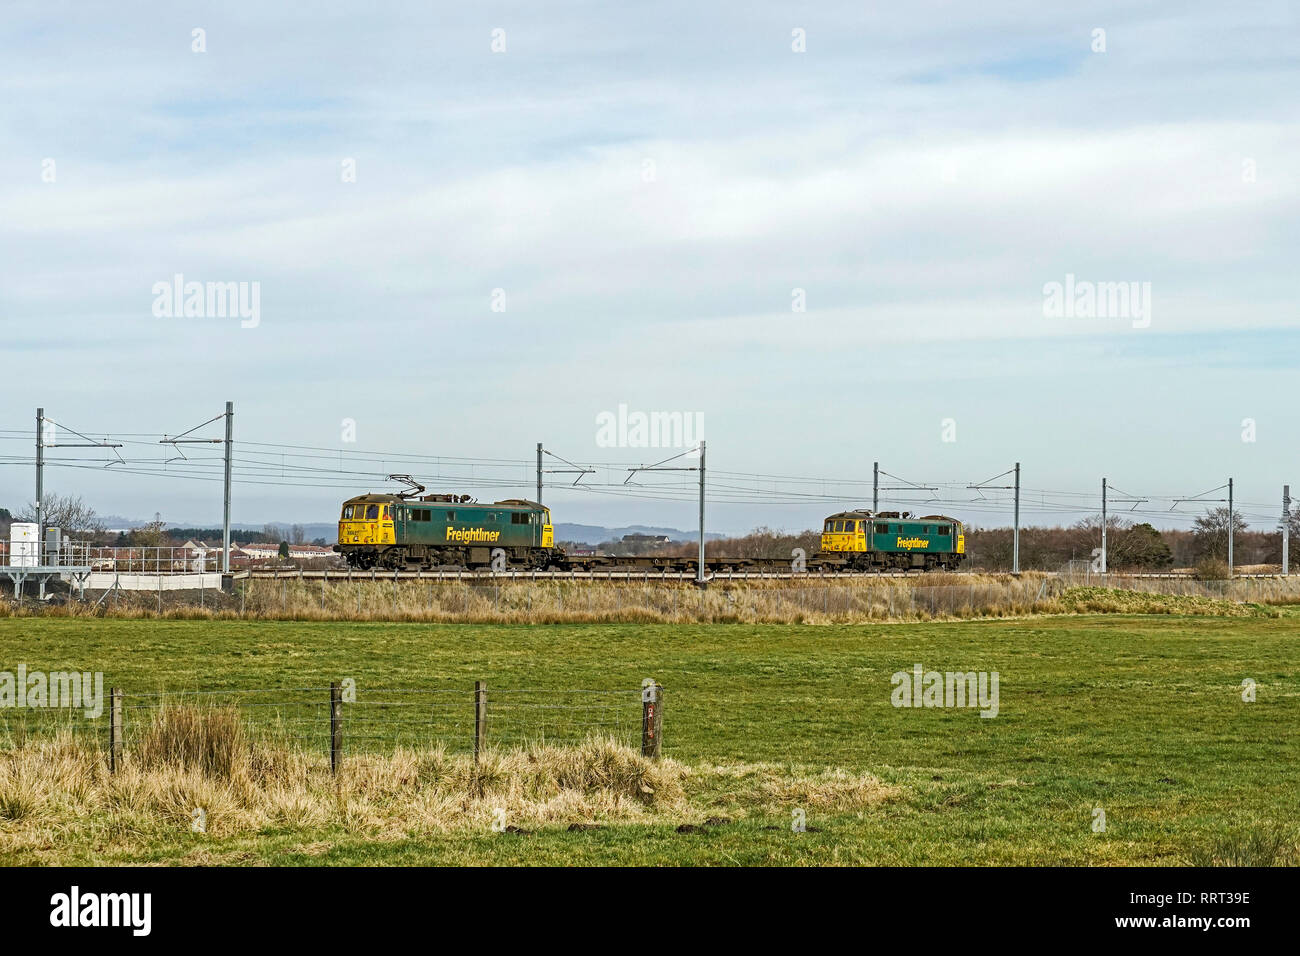 Network Rail test train with two Class 86 electric locomotives on the electrified railway line between Glasgow Central and Edinburgh through Shotts Stock Photo